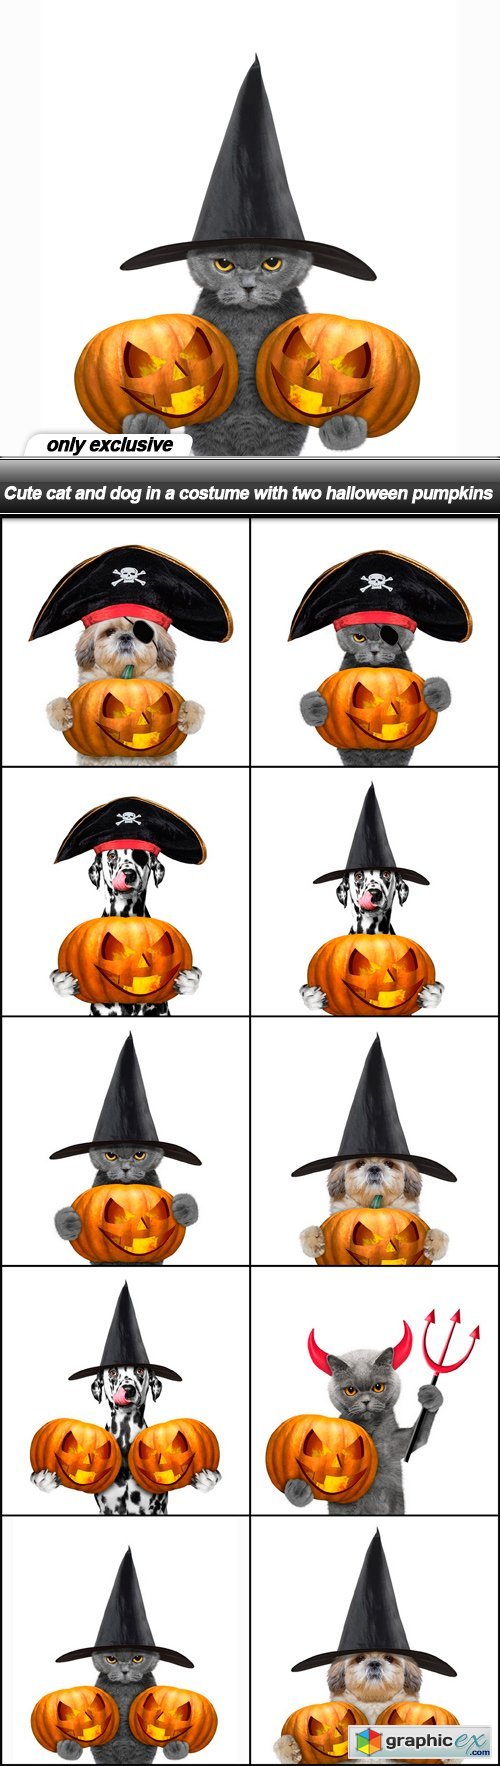 Cute cat and dog in a costume with two halloween pumpkins - 10 UHQ JPEG